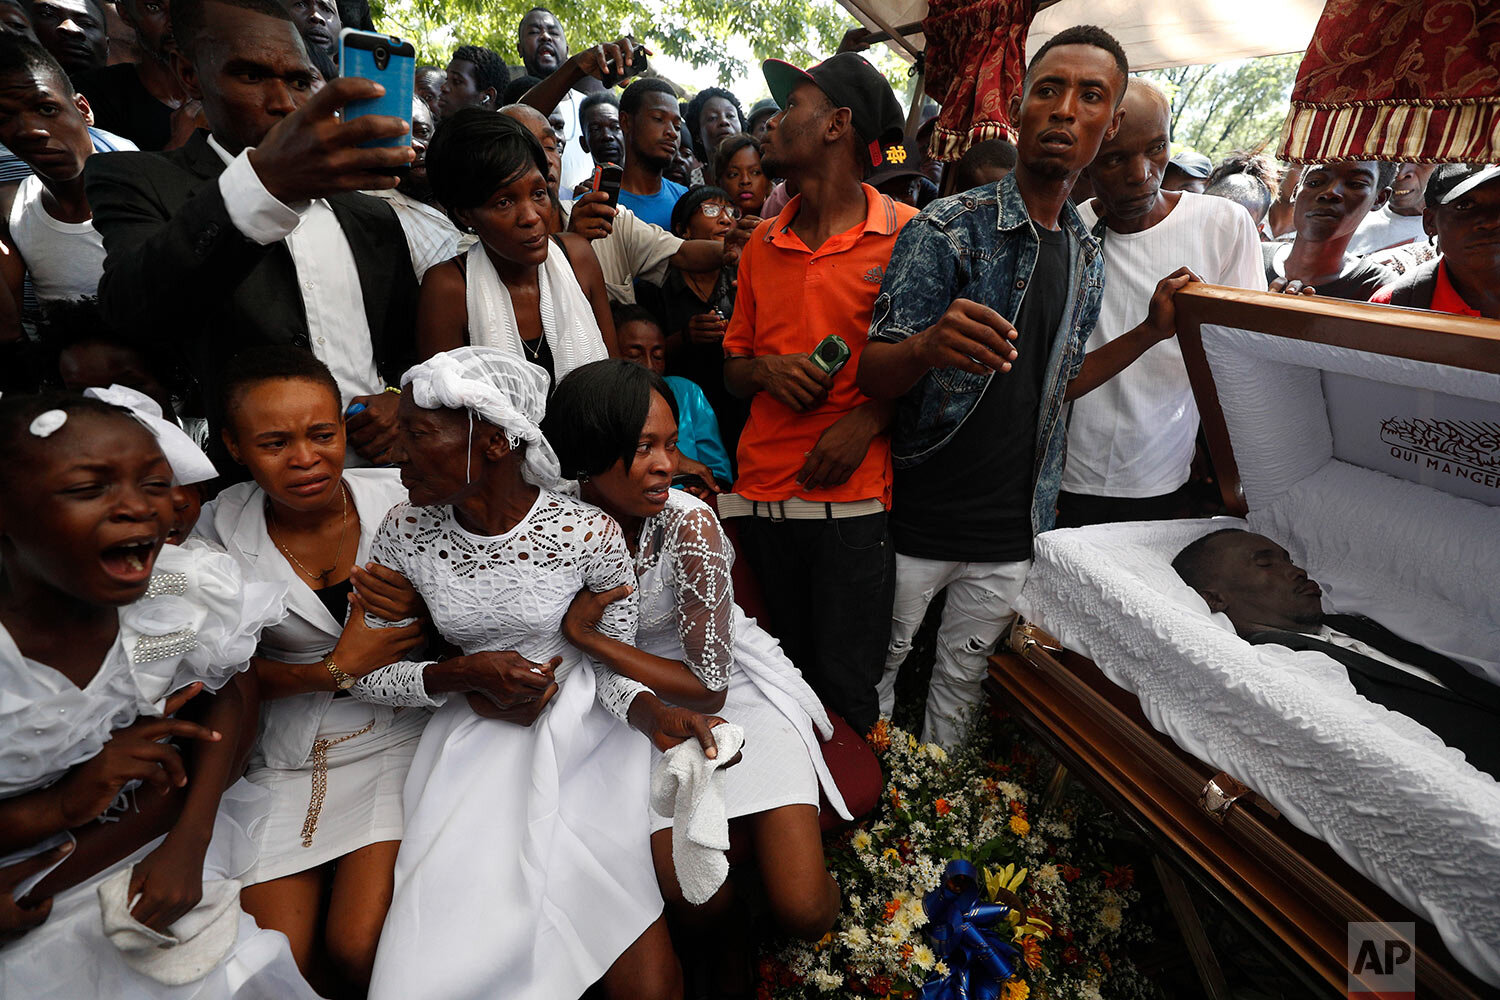  Family members grieve beside the coffin of one of the men killed during a month of demonstrations aimed at ousting Haitian President Jovenel Moïse, during a joint funeral for two victims in a public plaza near the National Palace in central Port-au-